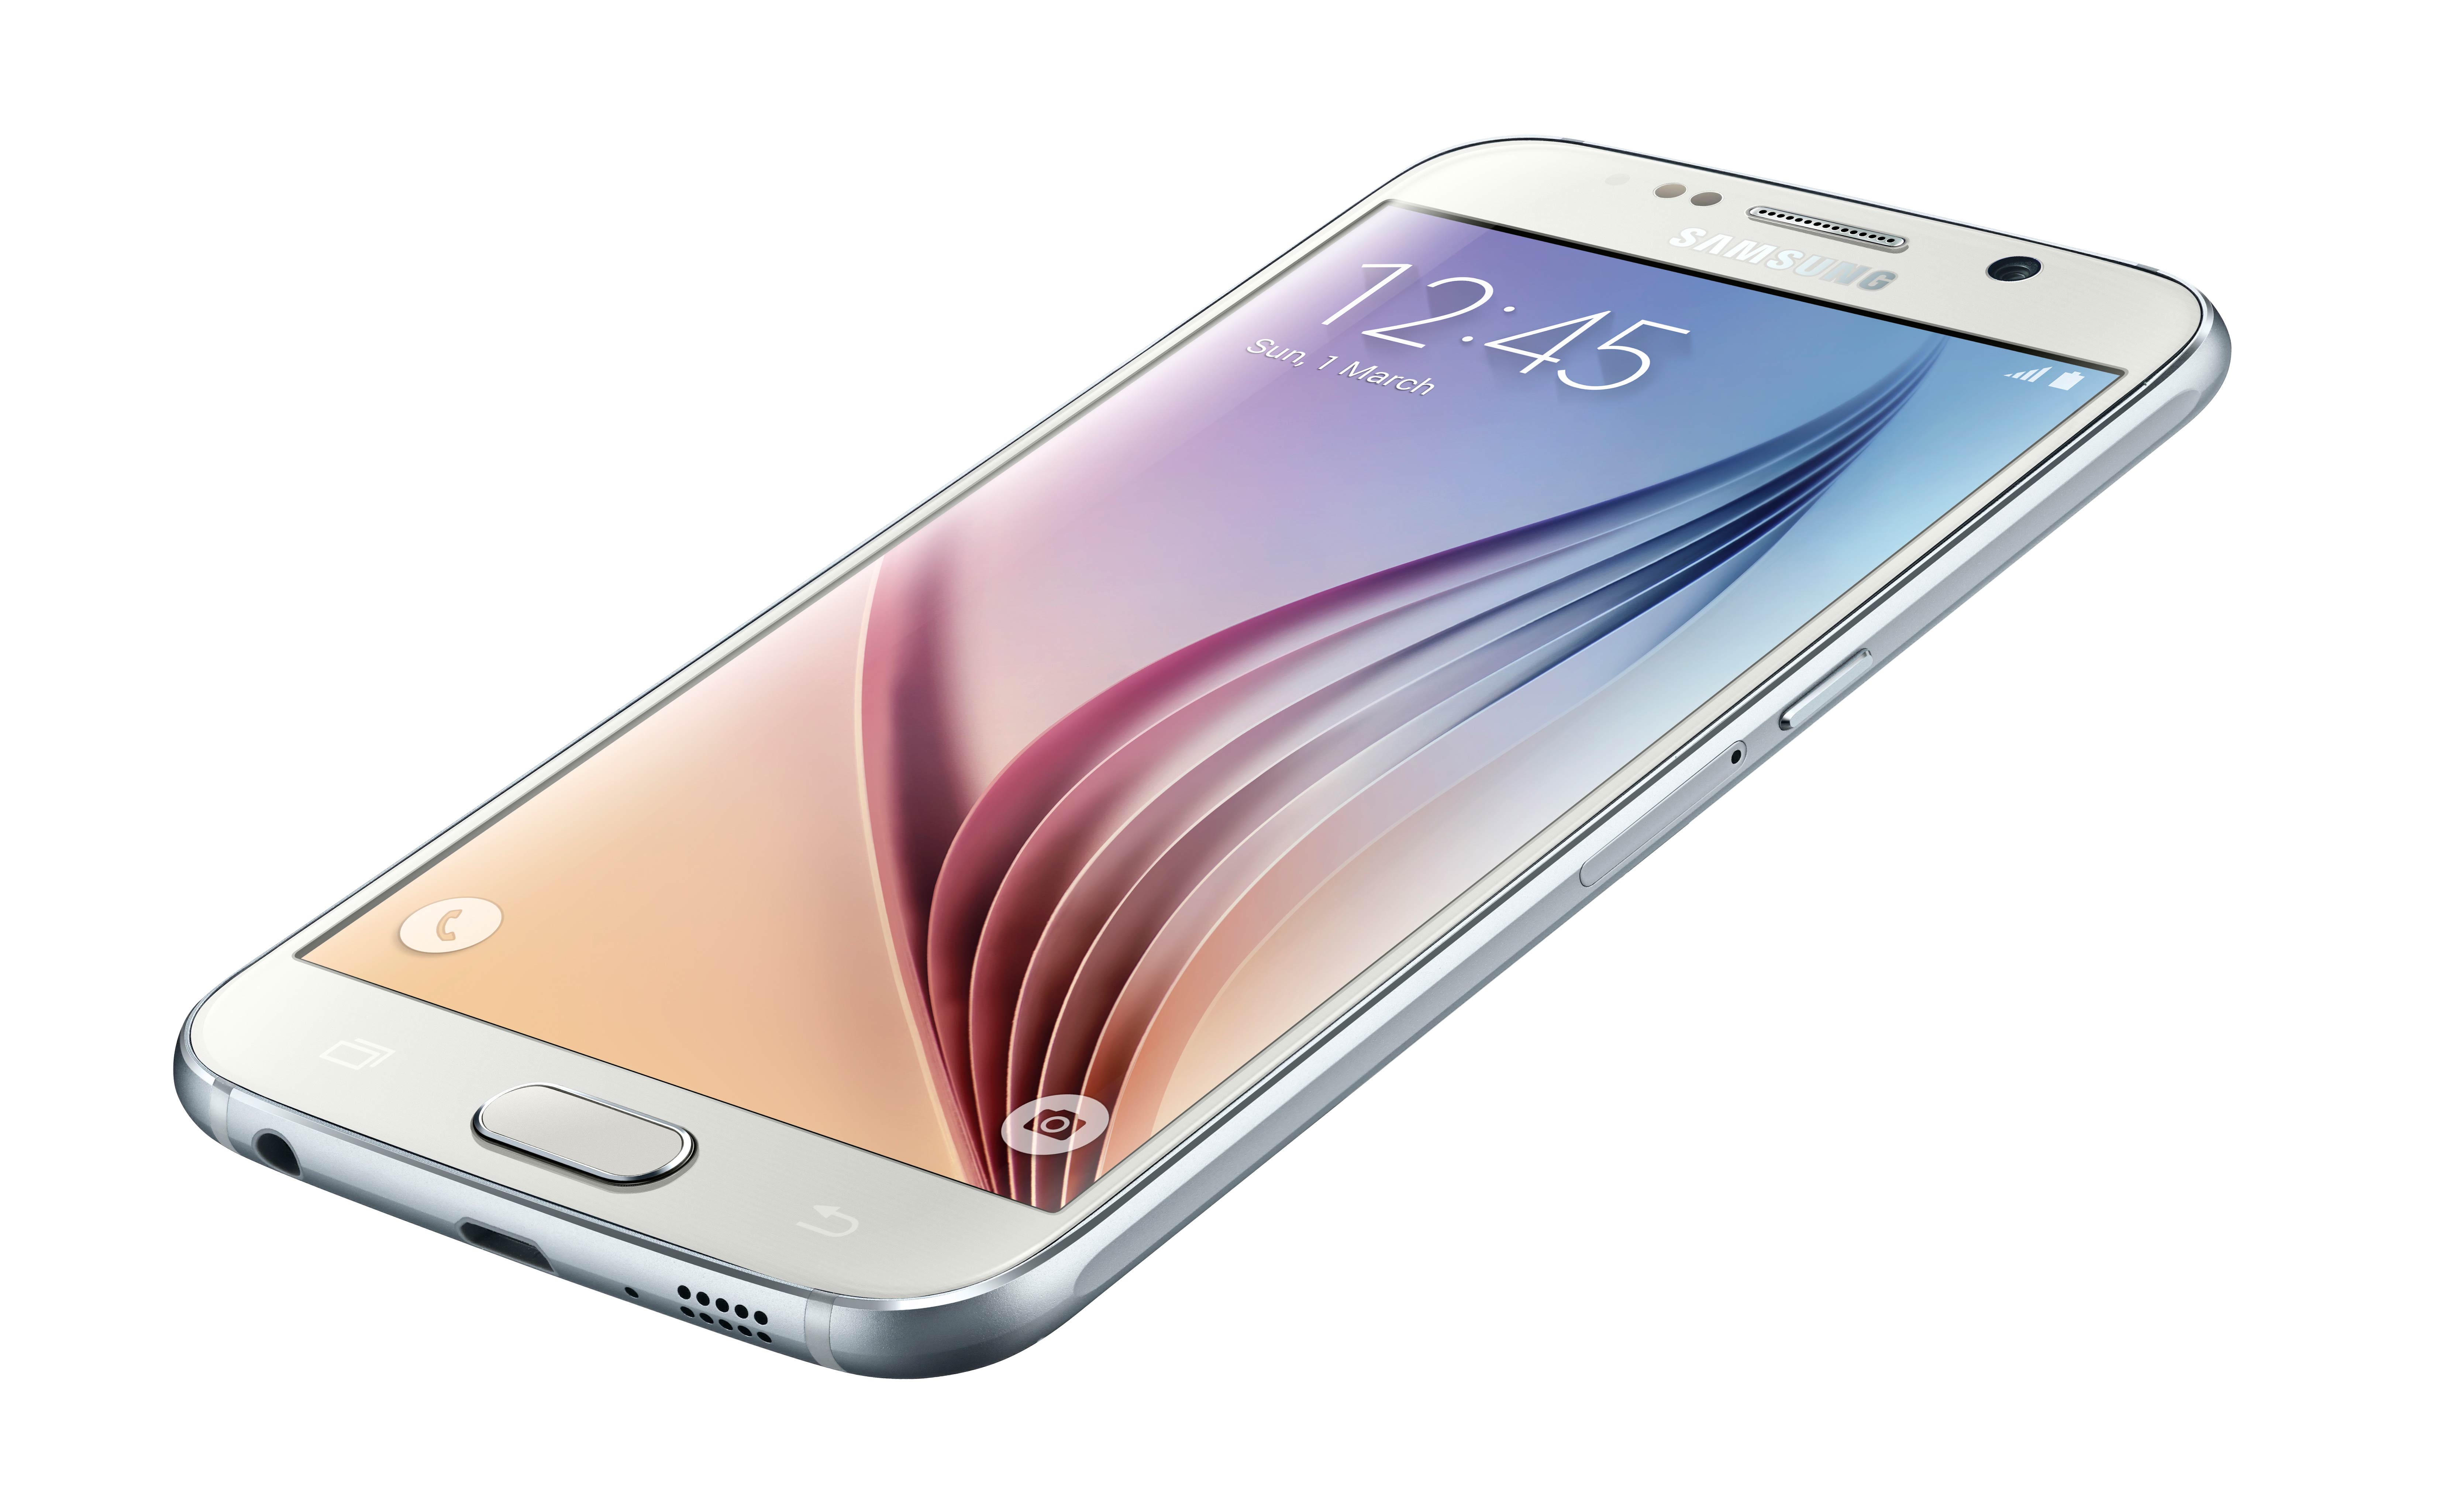 Samsung leaves a decent amount of storage available on the Galaxy S6.